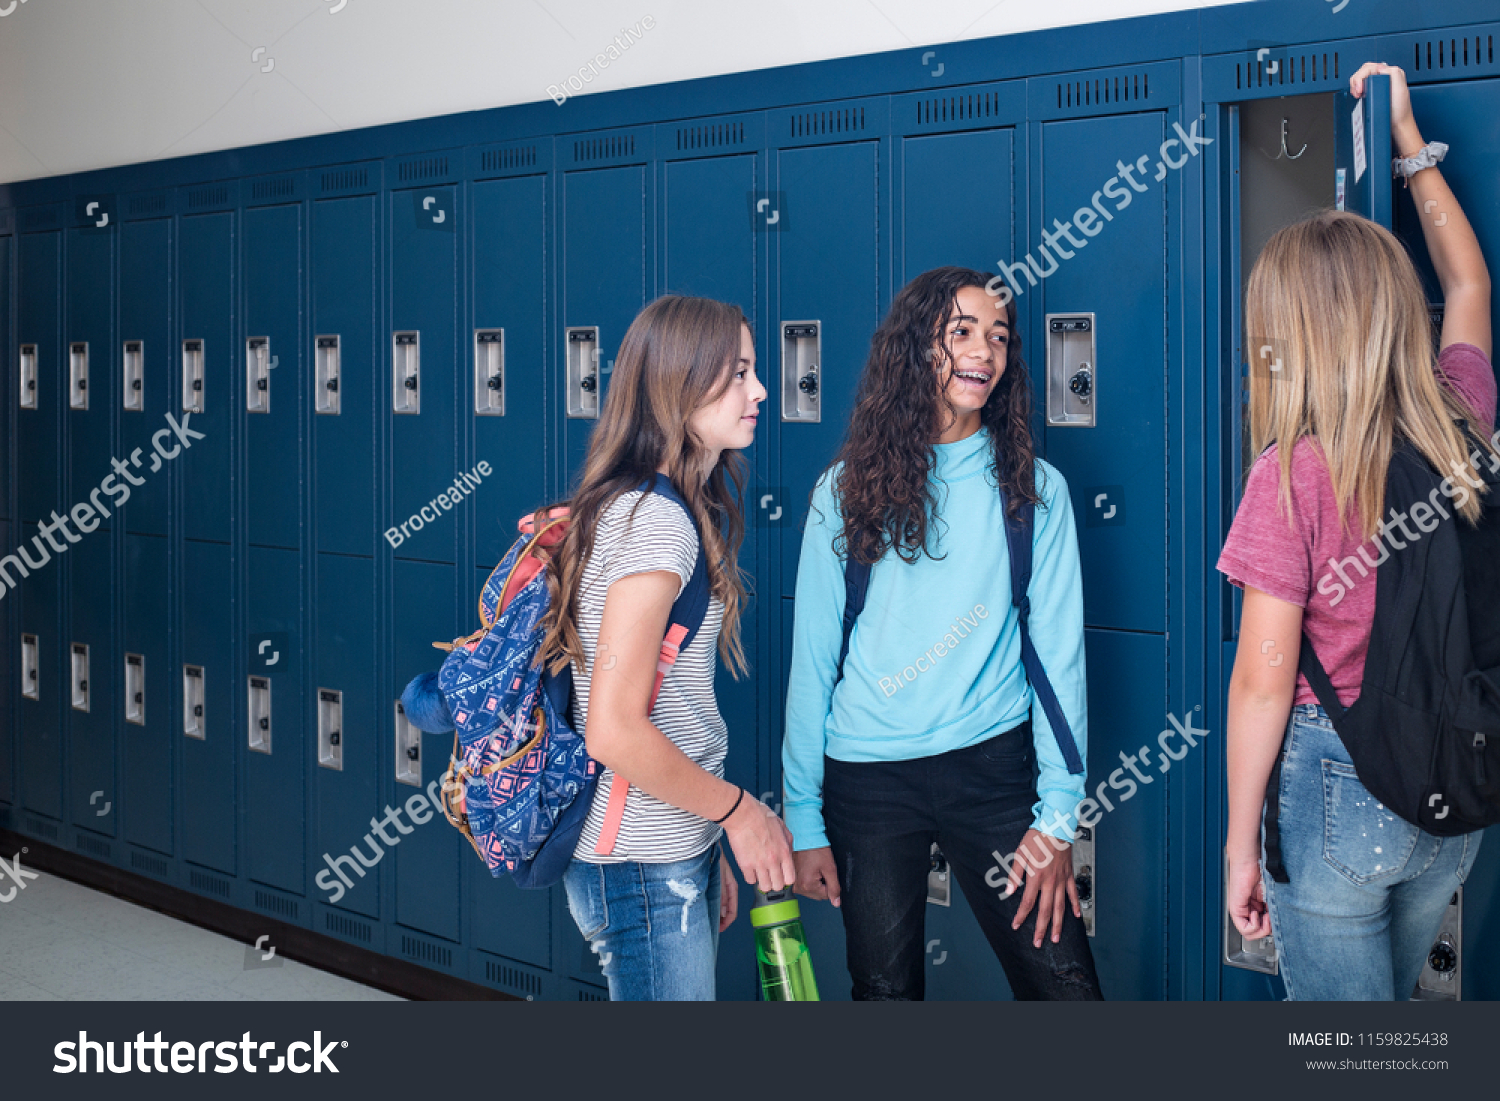 Candid photo of Three Junior High school Students talking together in a school hallway. Diverse Female school girls smiling and having fun together during a break at school standing by their lockers #1159825438